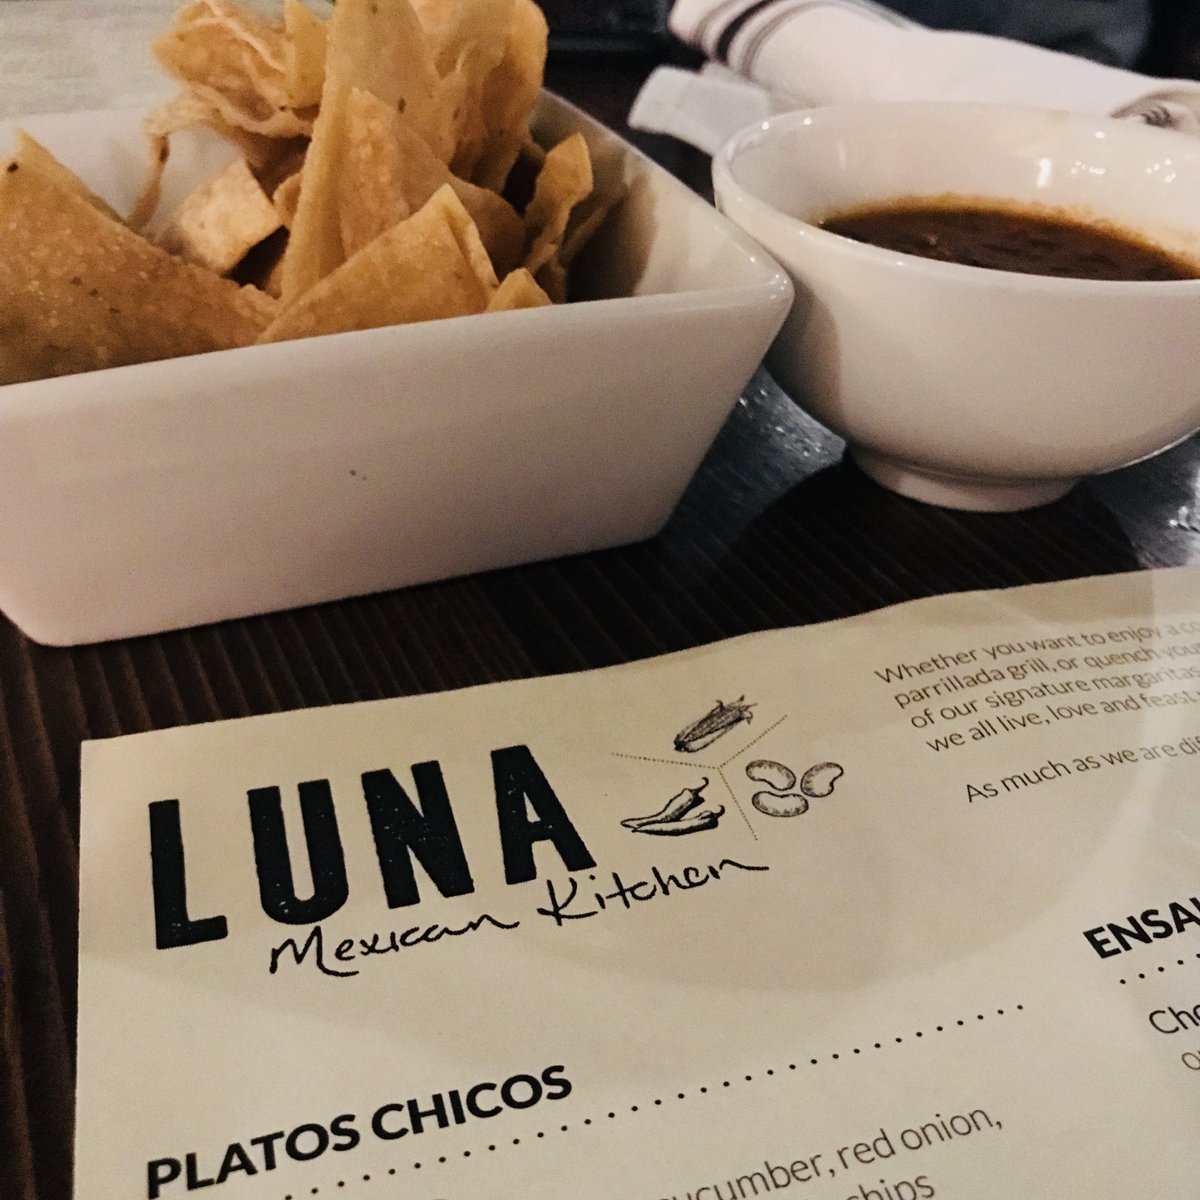 Join us today for house-made tortilla chips and salsa. It's one of our favorite ways to warm up during this frigid weather.